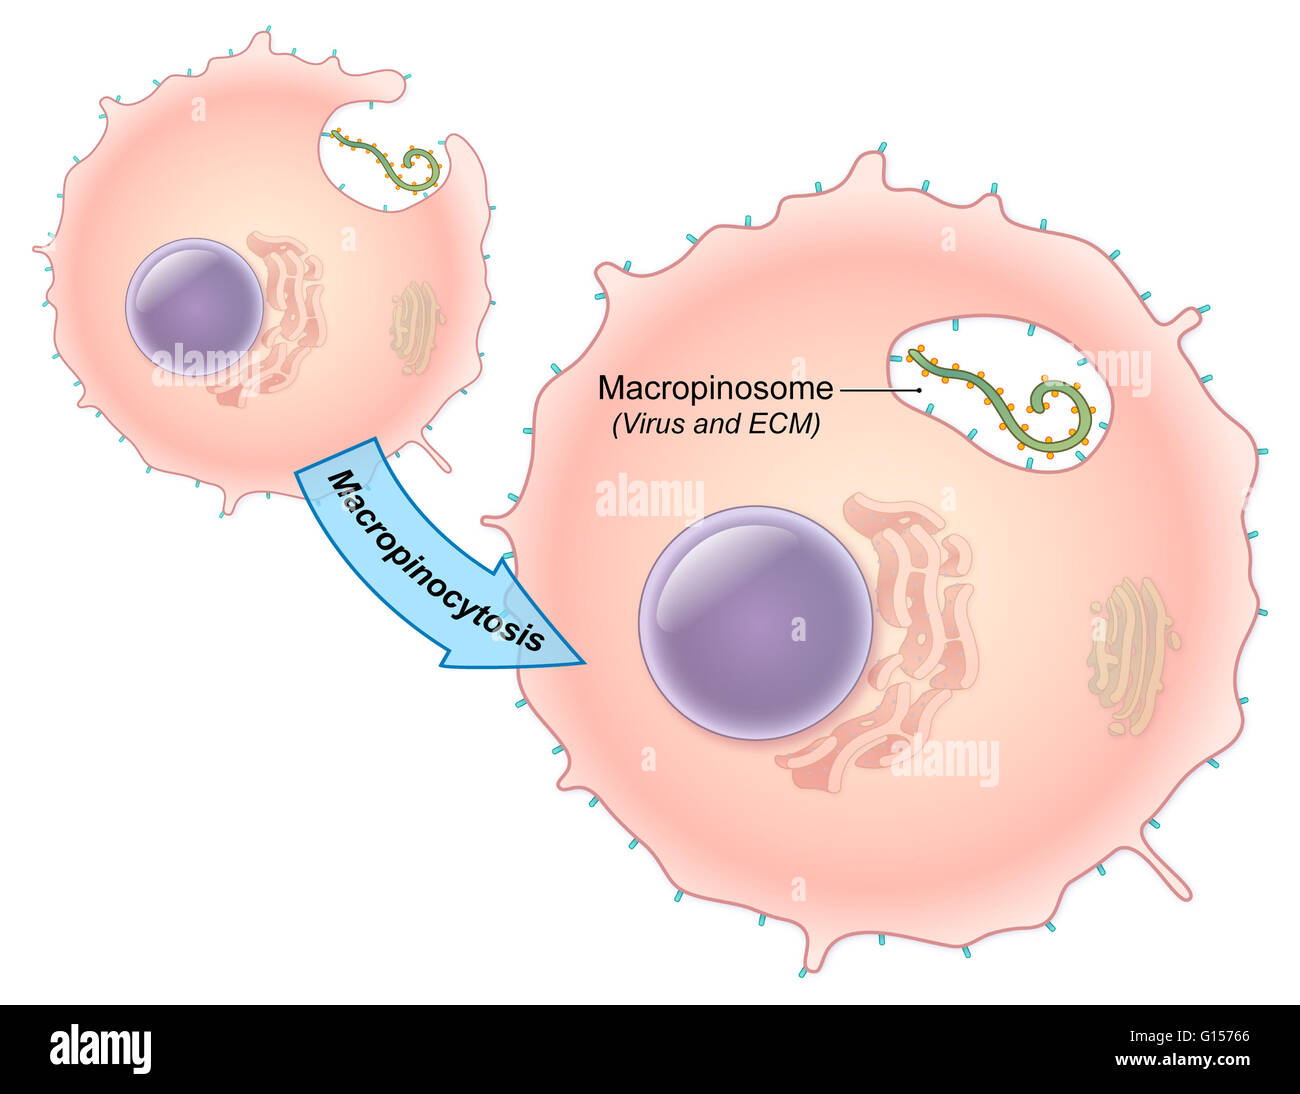 An illustrated diagram of the Ebola virus replication process. The ebola virus is a single-stranded RNA filovirus responsible for severe hemorrhagic fever in humans. In this illustration, the virus enters the cell though the process of macropinocytosis to Stock Photo